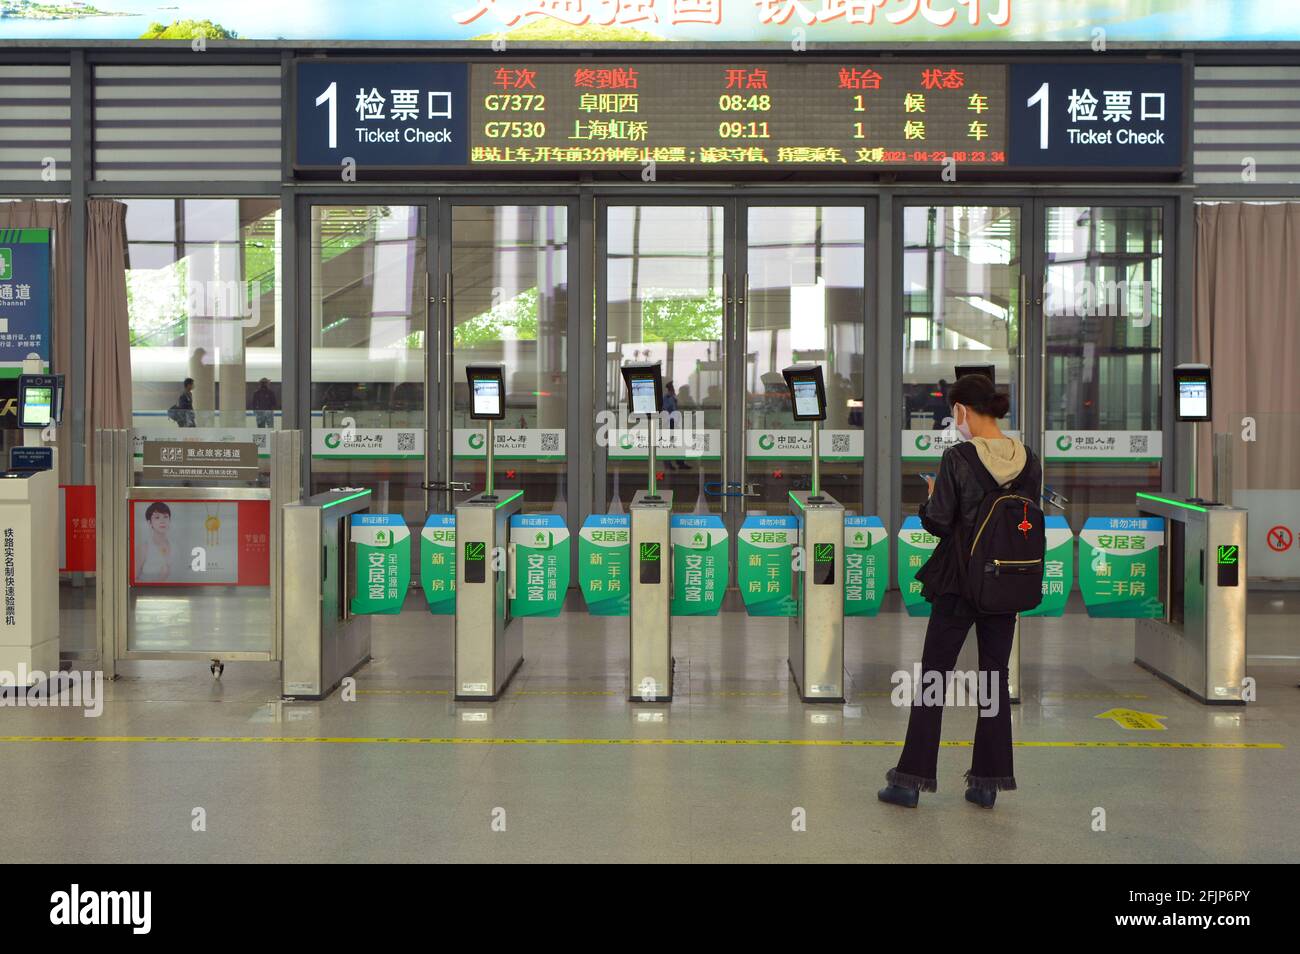 A single woman waits for her train to arrive in Jiaxing,China, when it does she can scan her ID card to go through the turnstile to the platform. Stock Photo